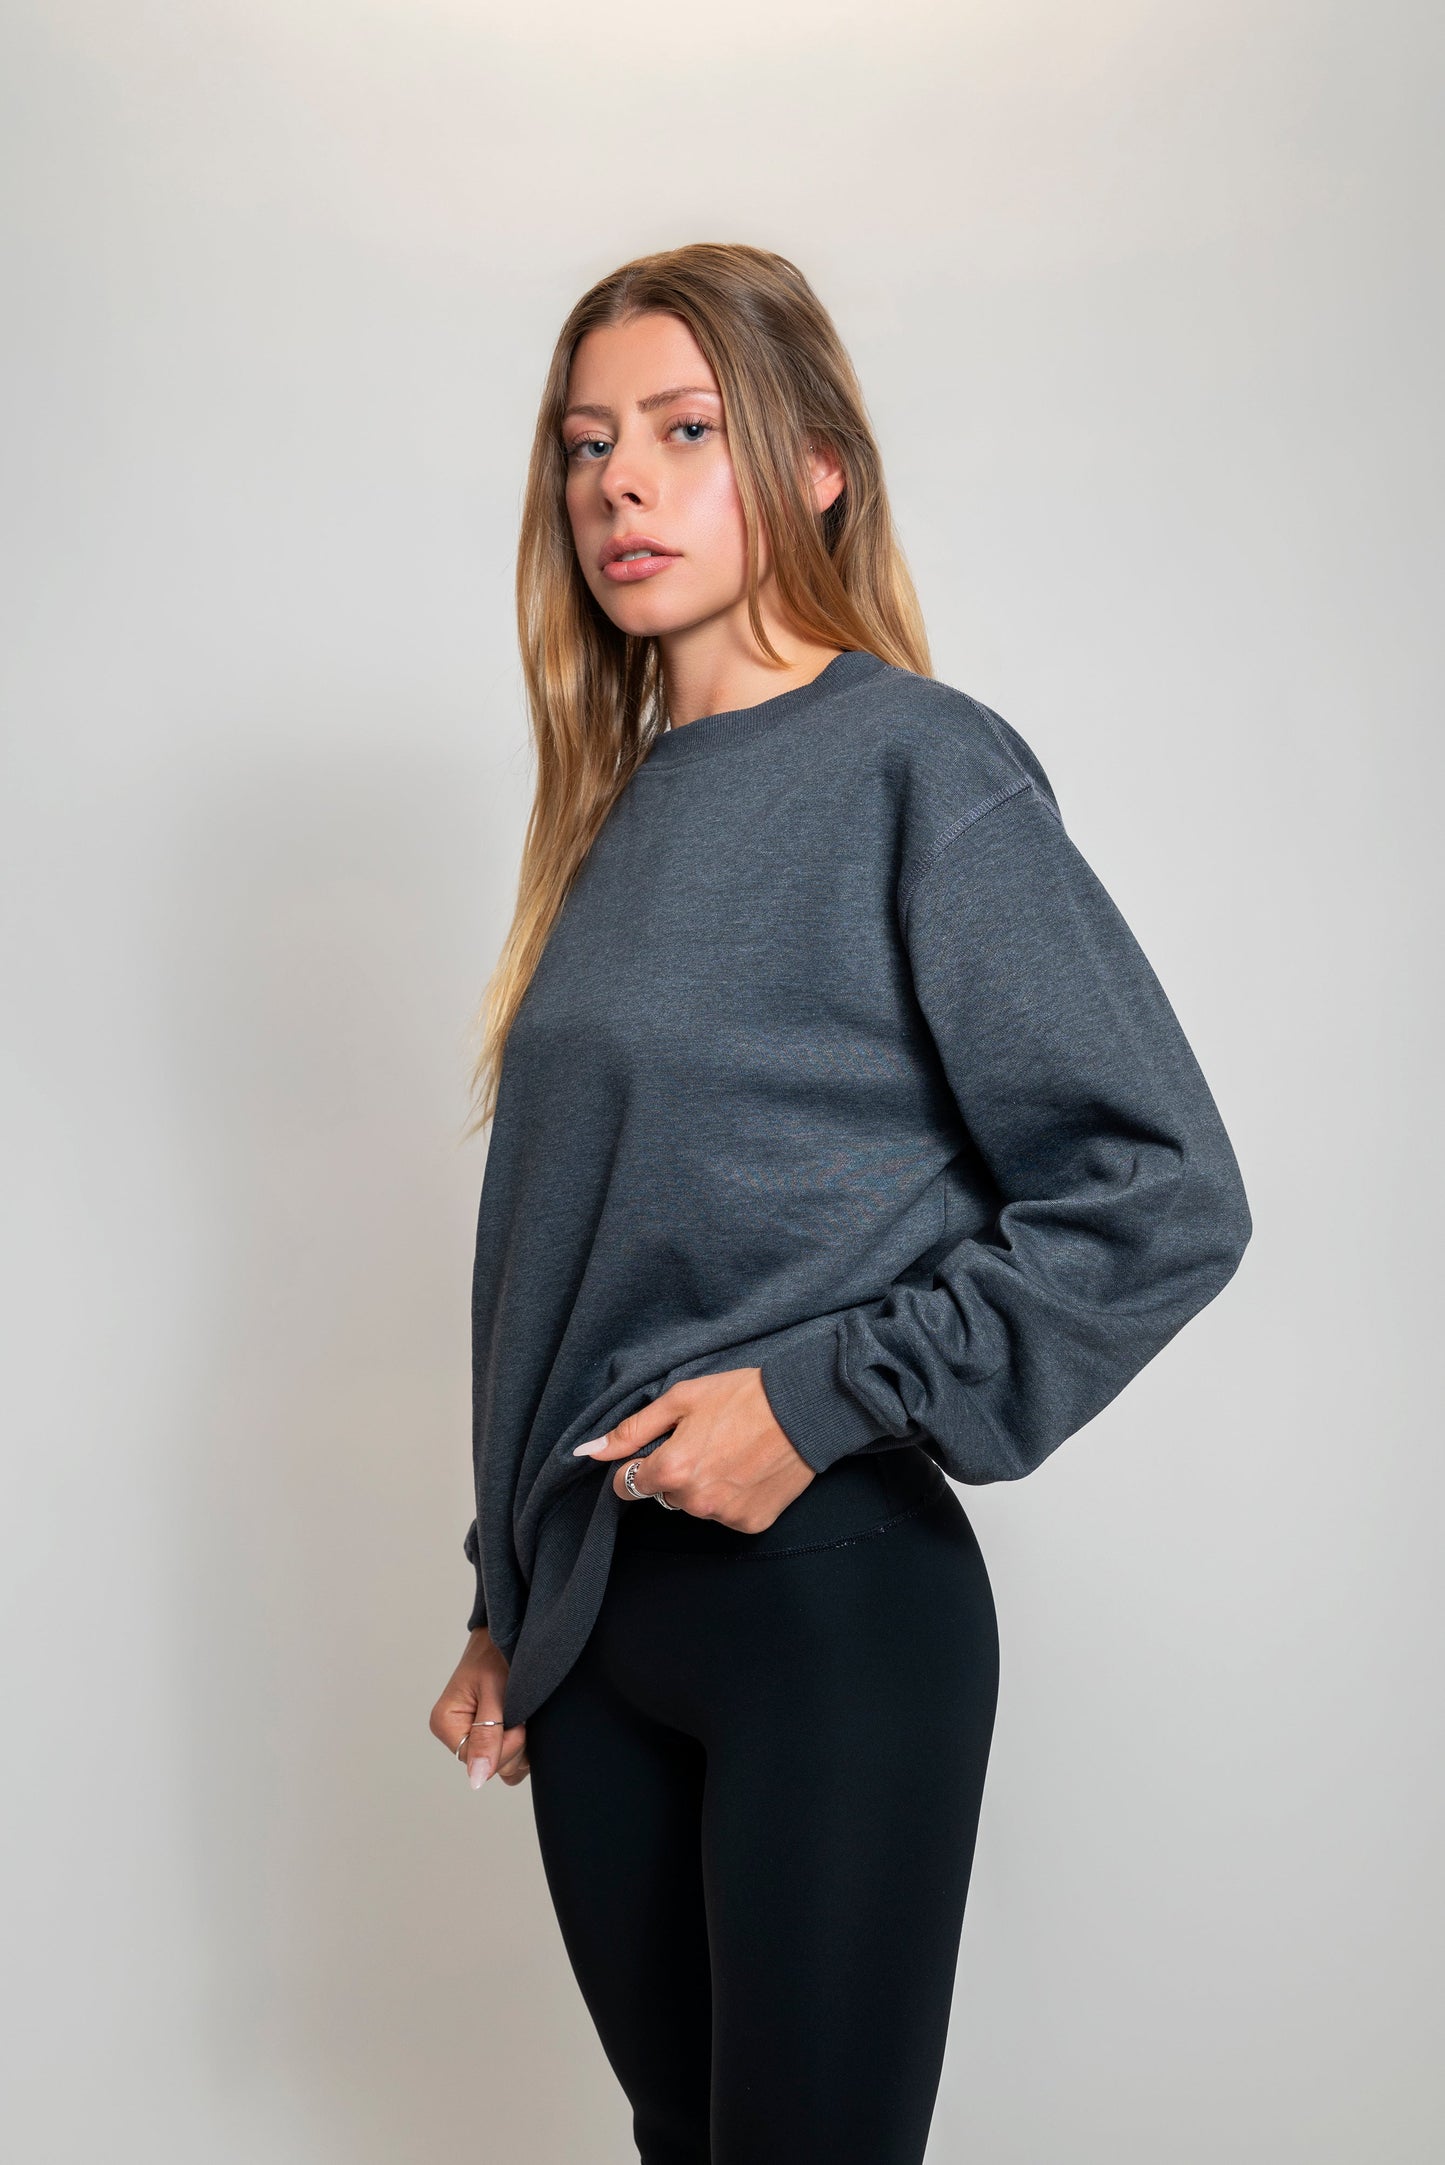 Adult Unisex French Terry Crewneck